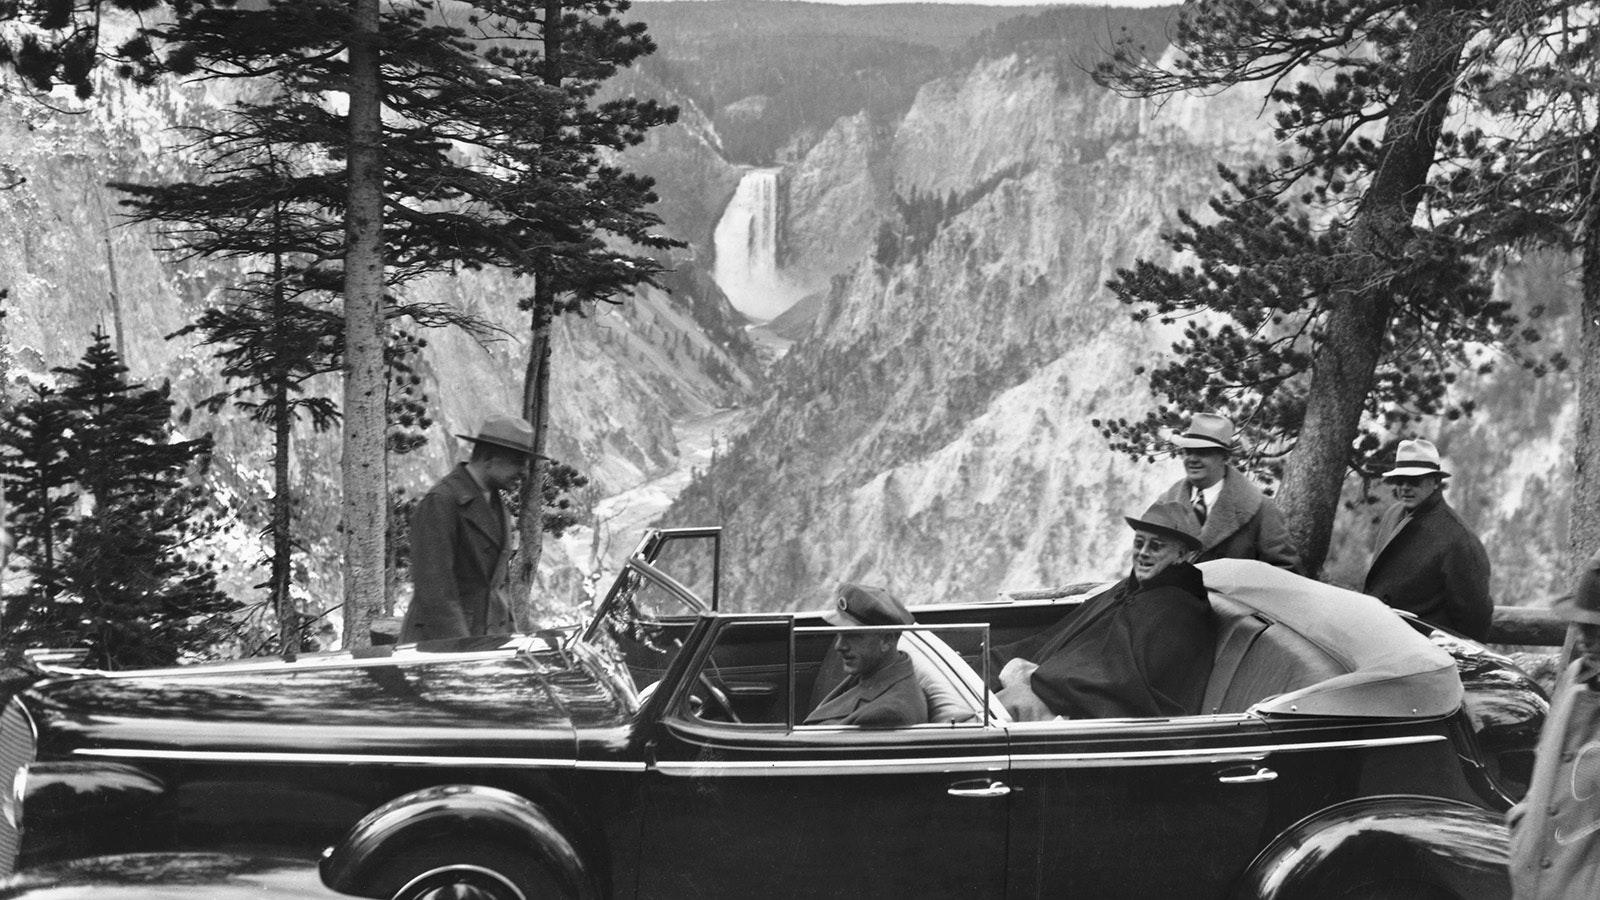 President Franklin Roosevelt visits the Grand Canyon of the Yellowstone during a tour of the Western states in 1937.